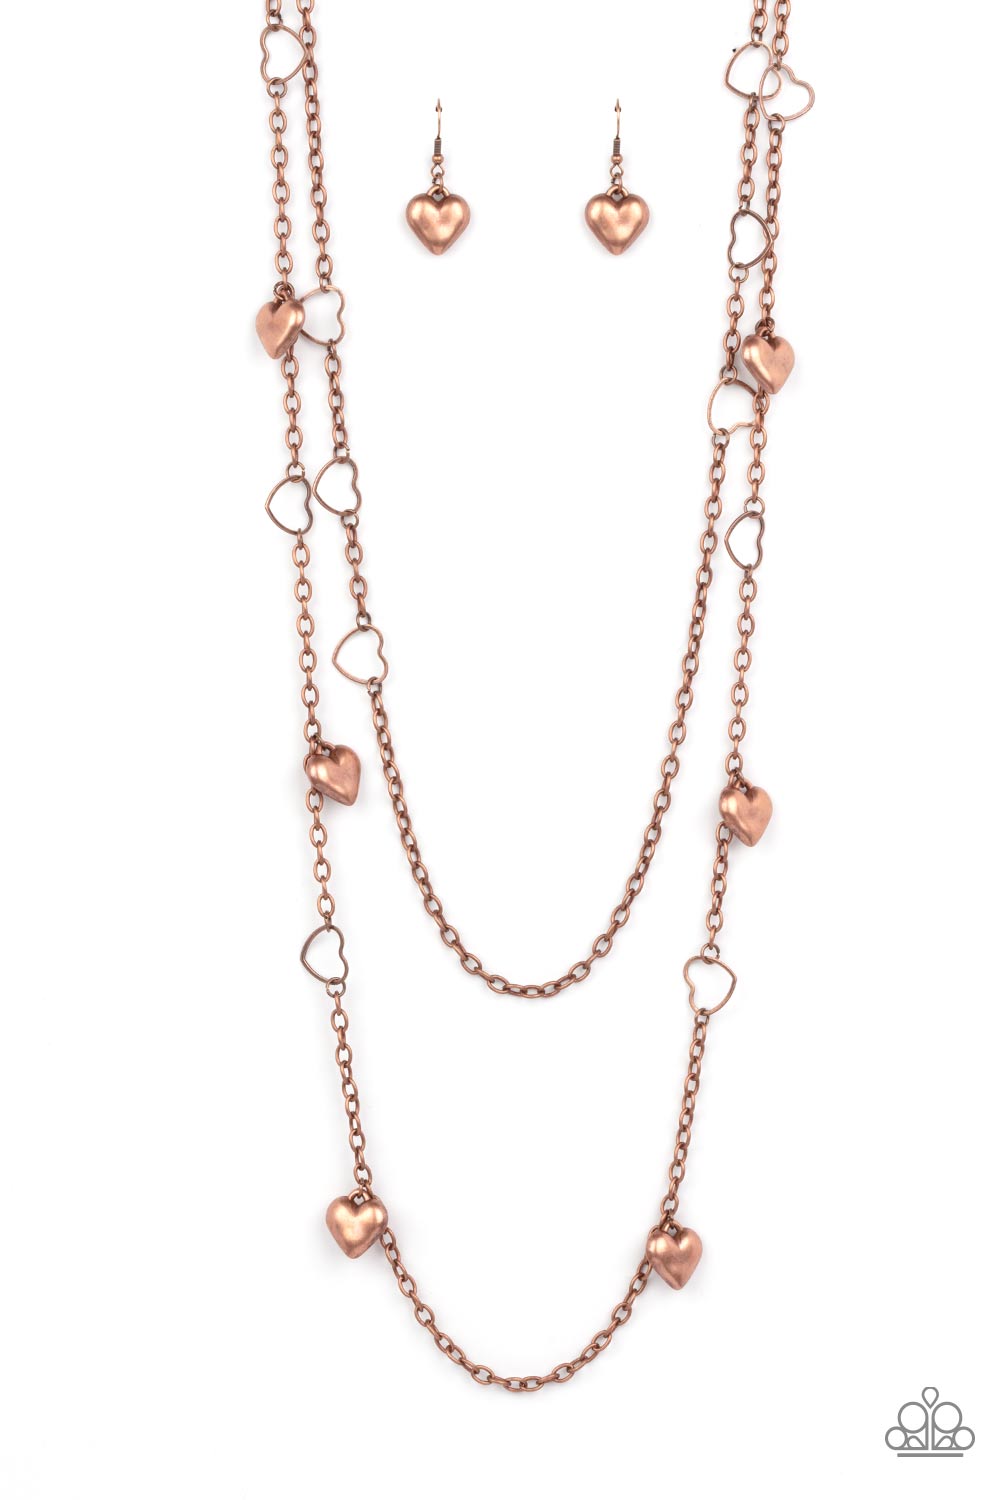 Chicly Cupid Necklace (Copper, Silver)